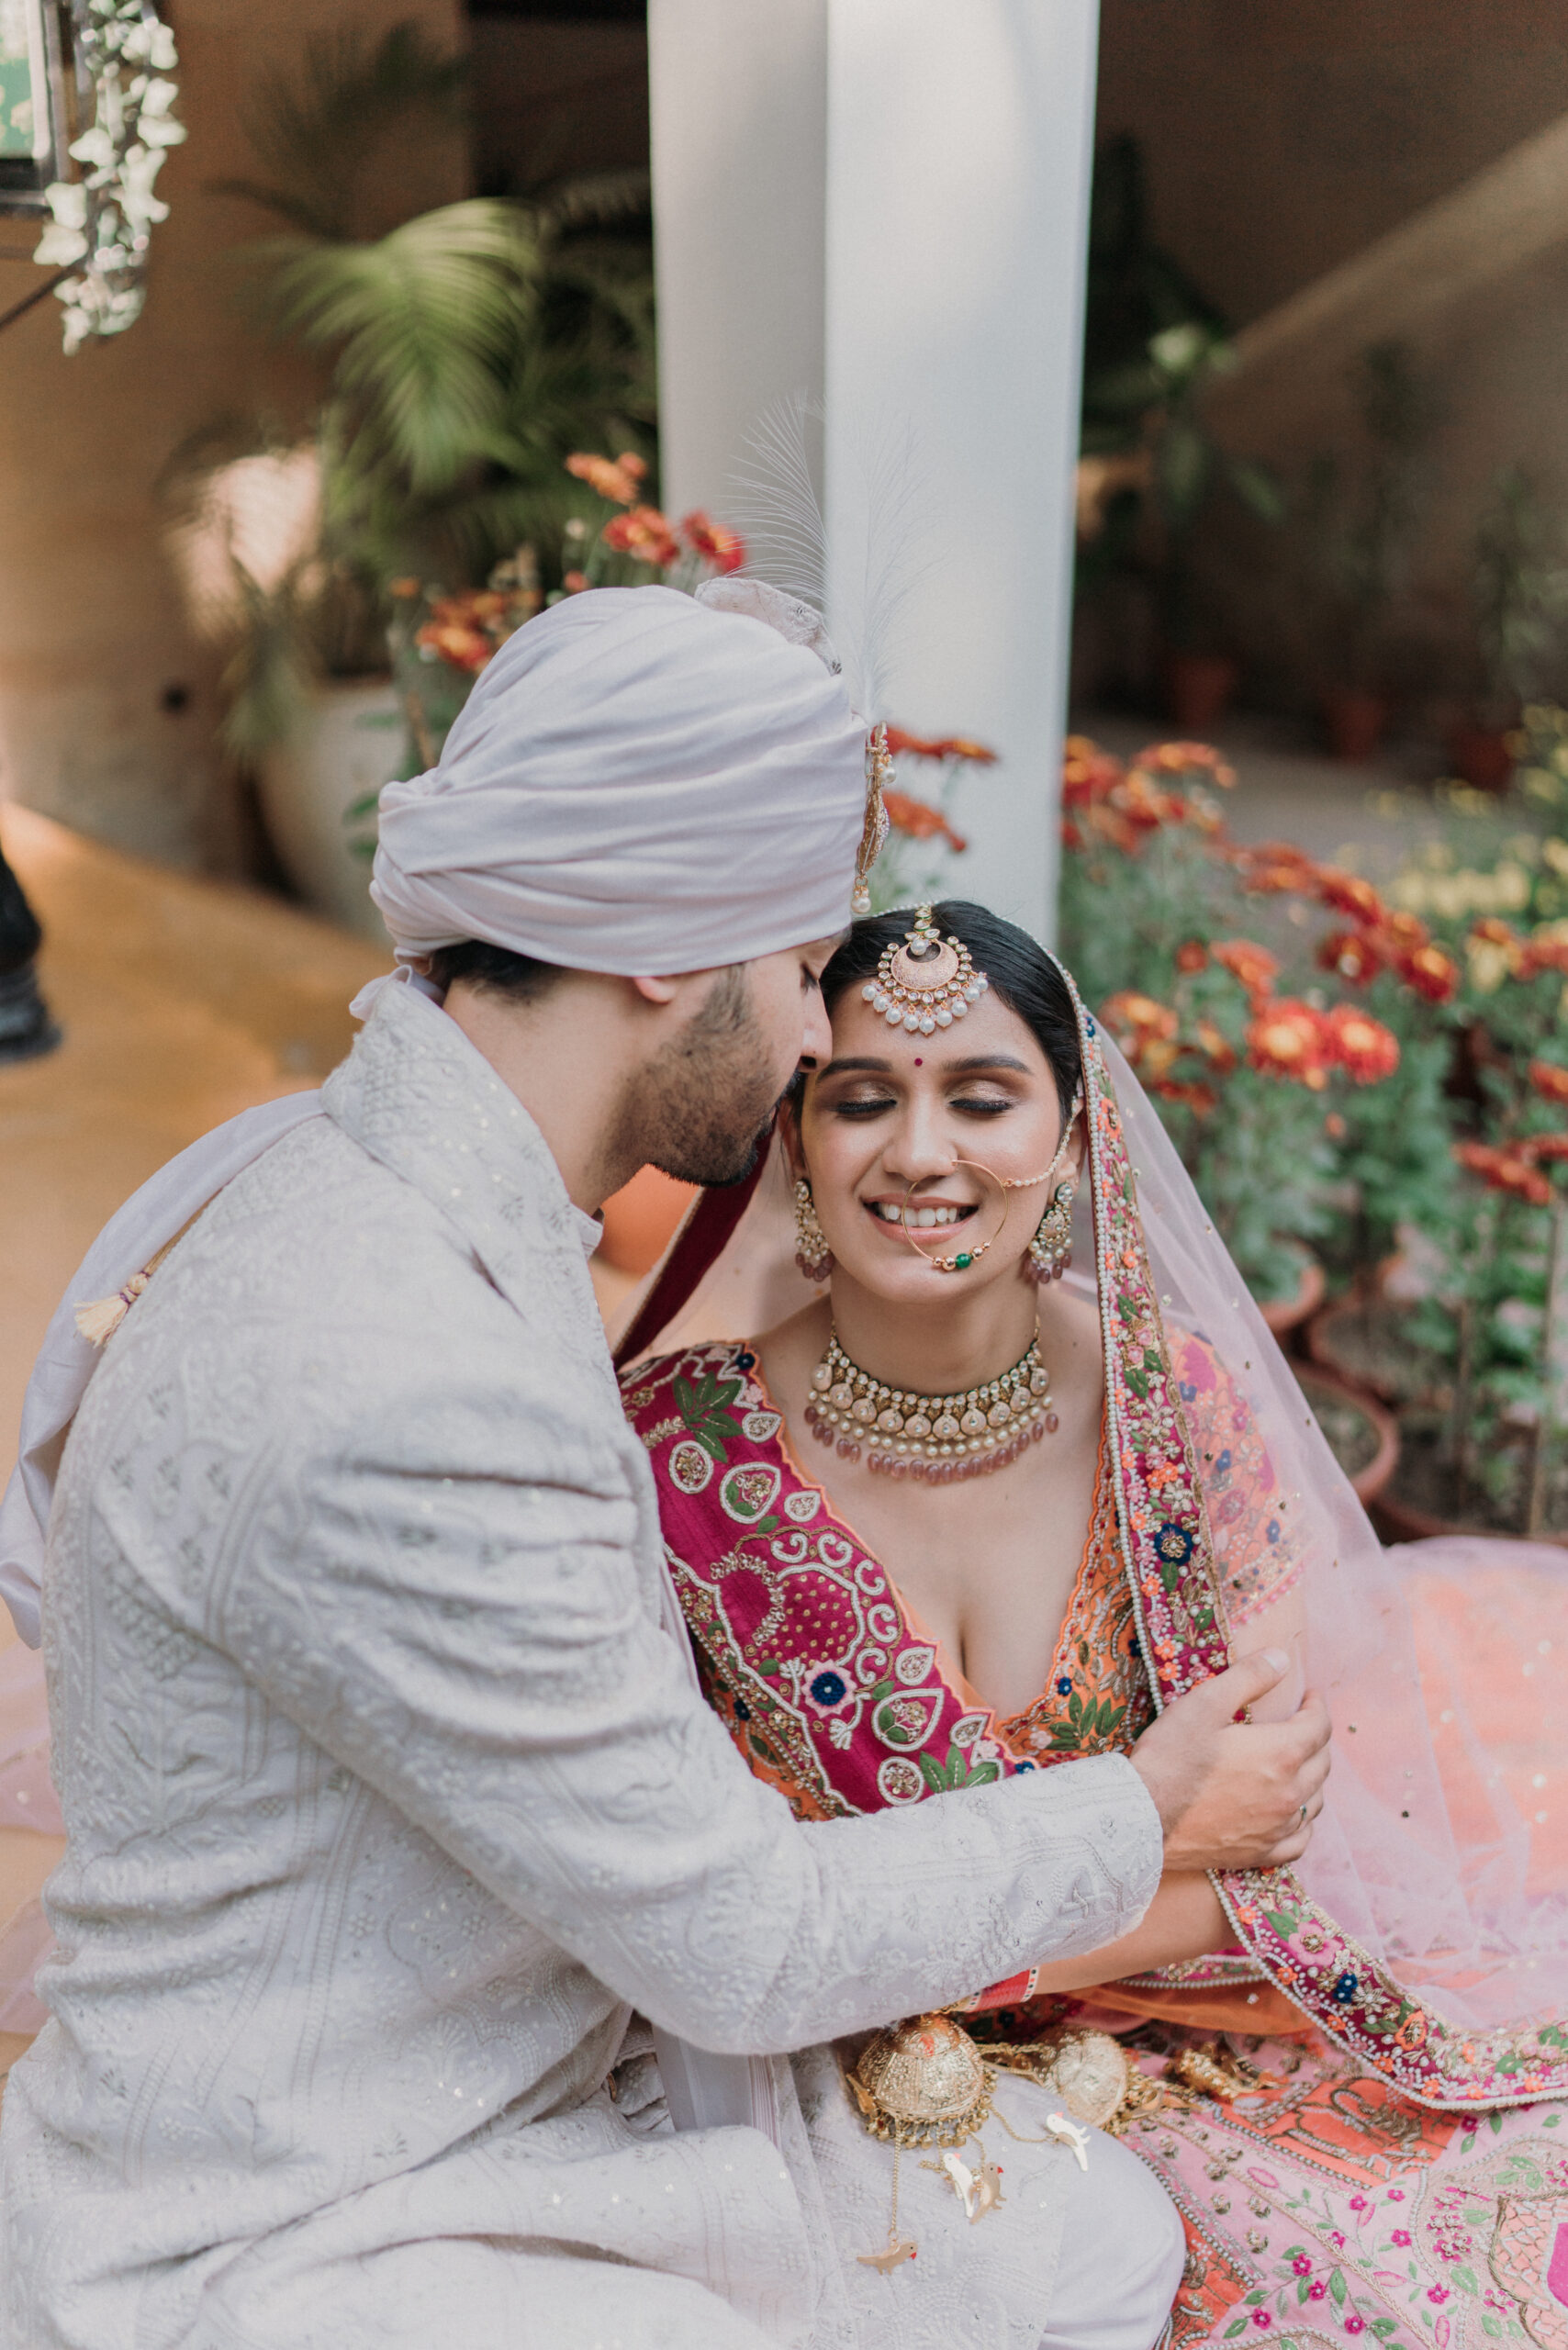 Cute Candid Wedding Poses For Couples That Have To Be Bookmarked!